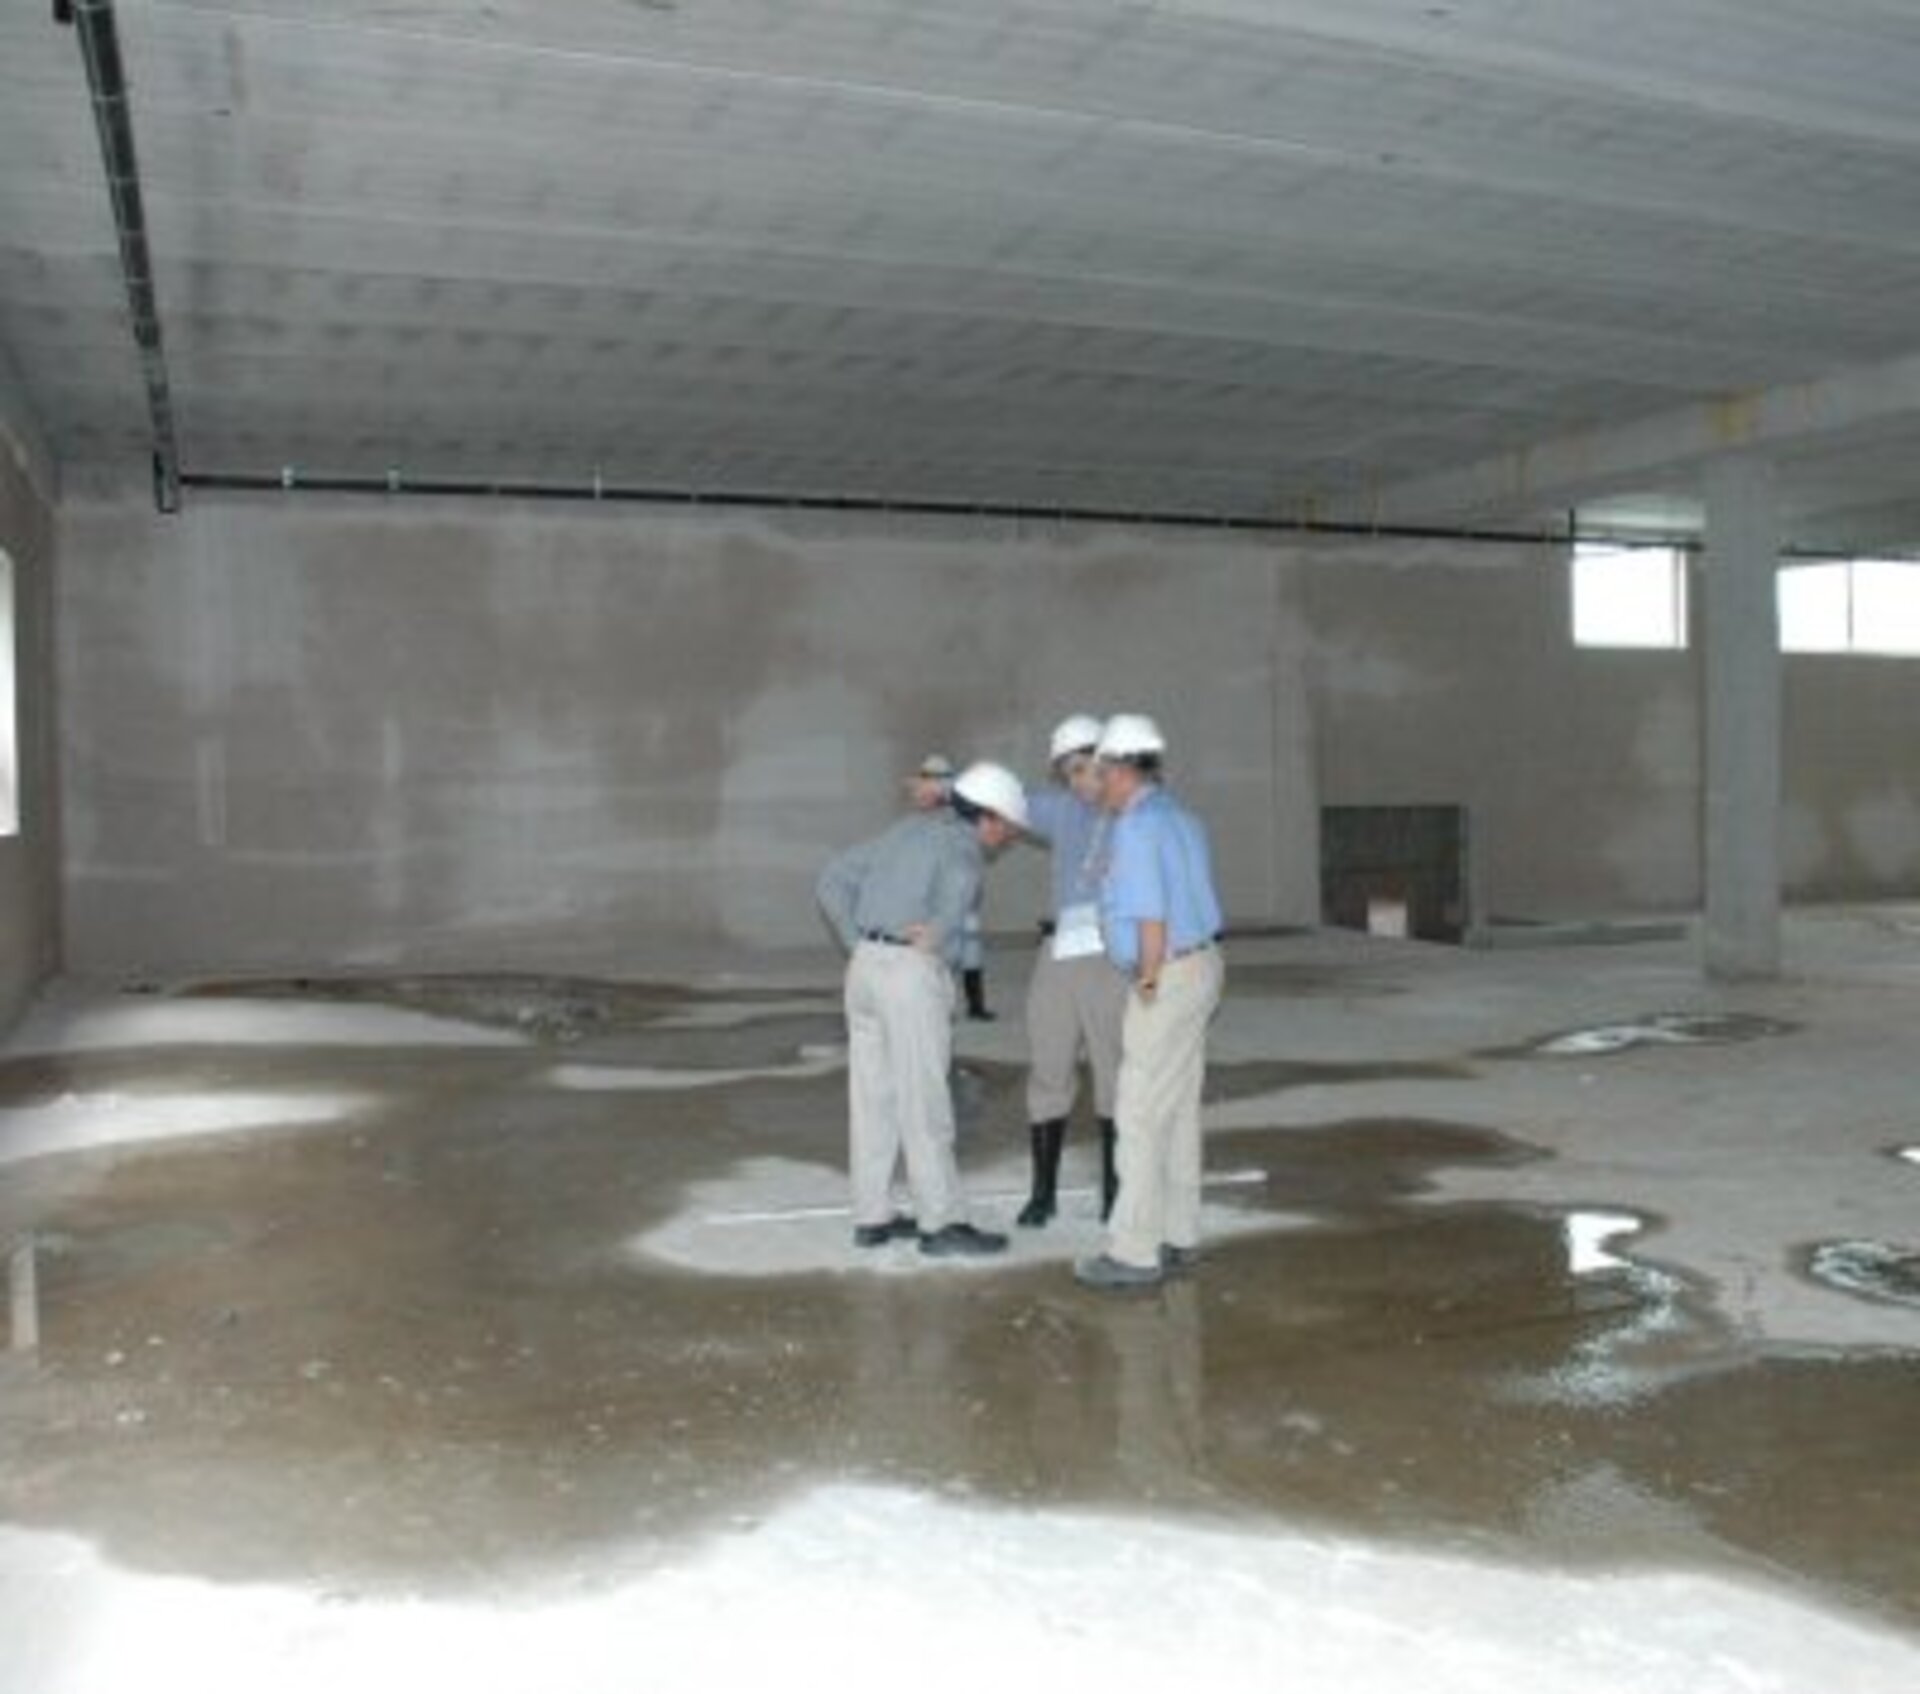 Figure 1:The large open space of the new building where the new CDF will be relocated